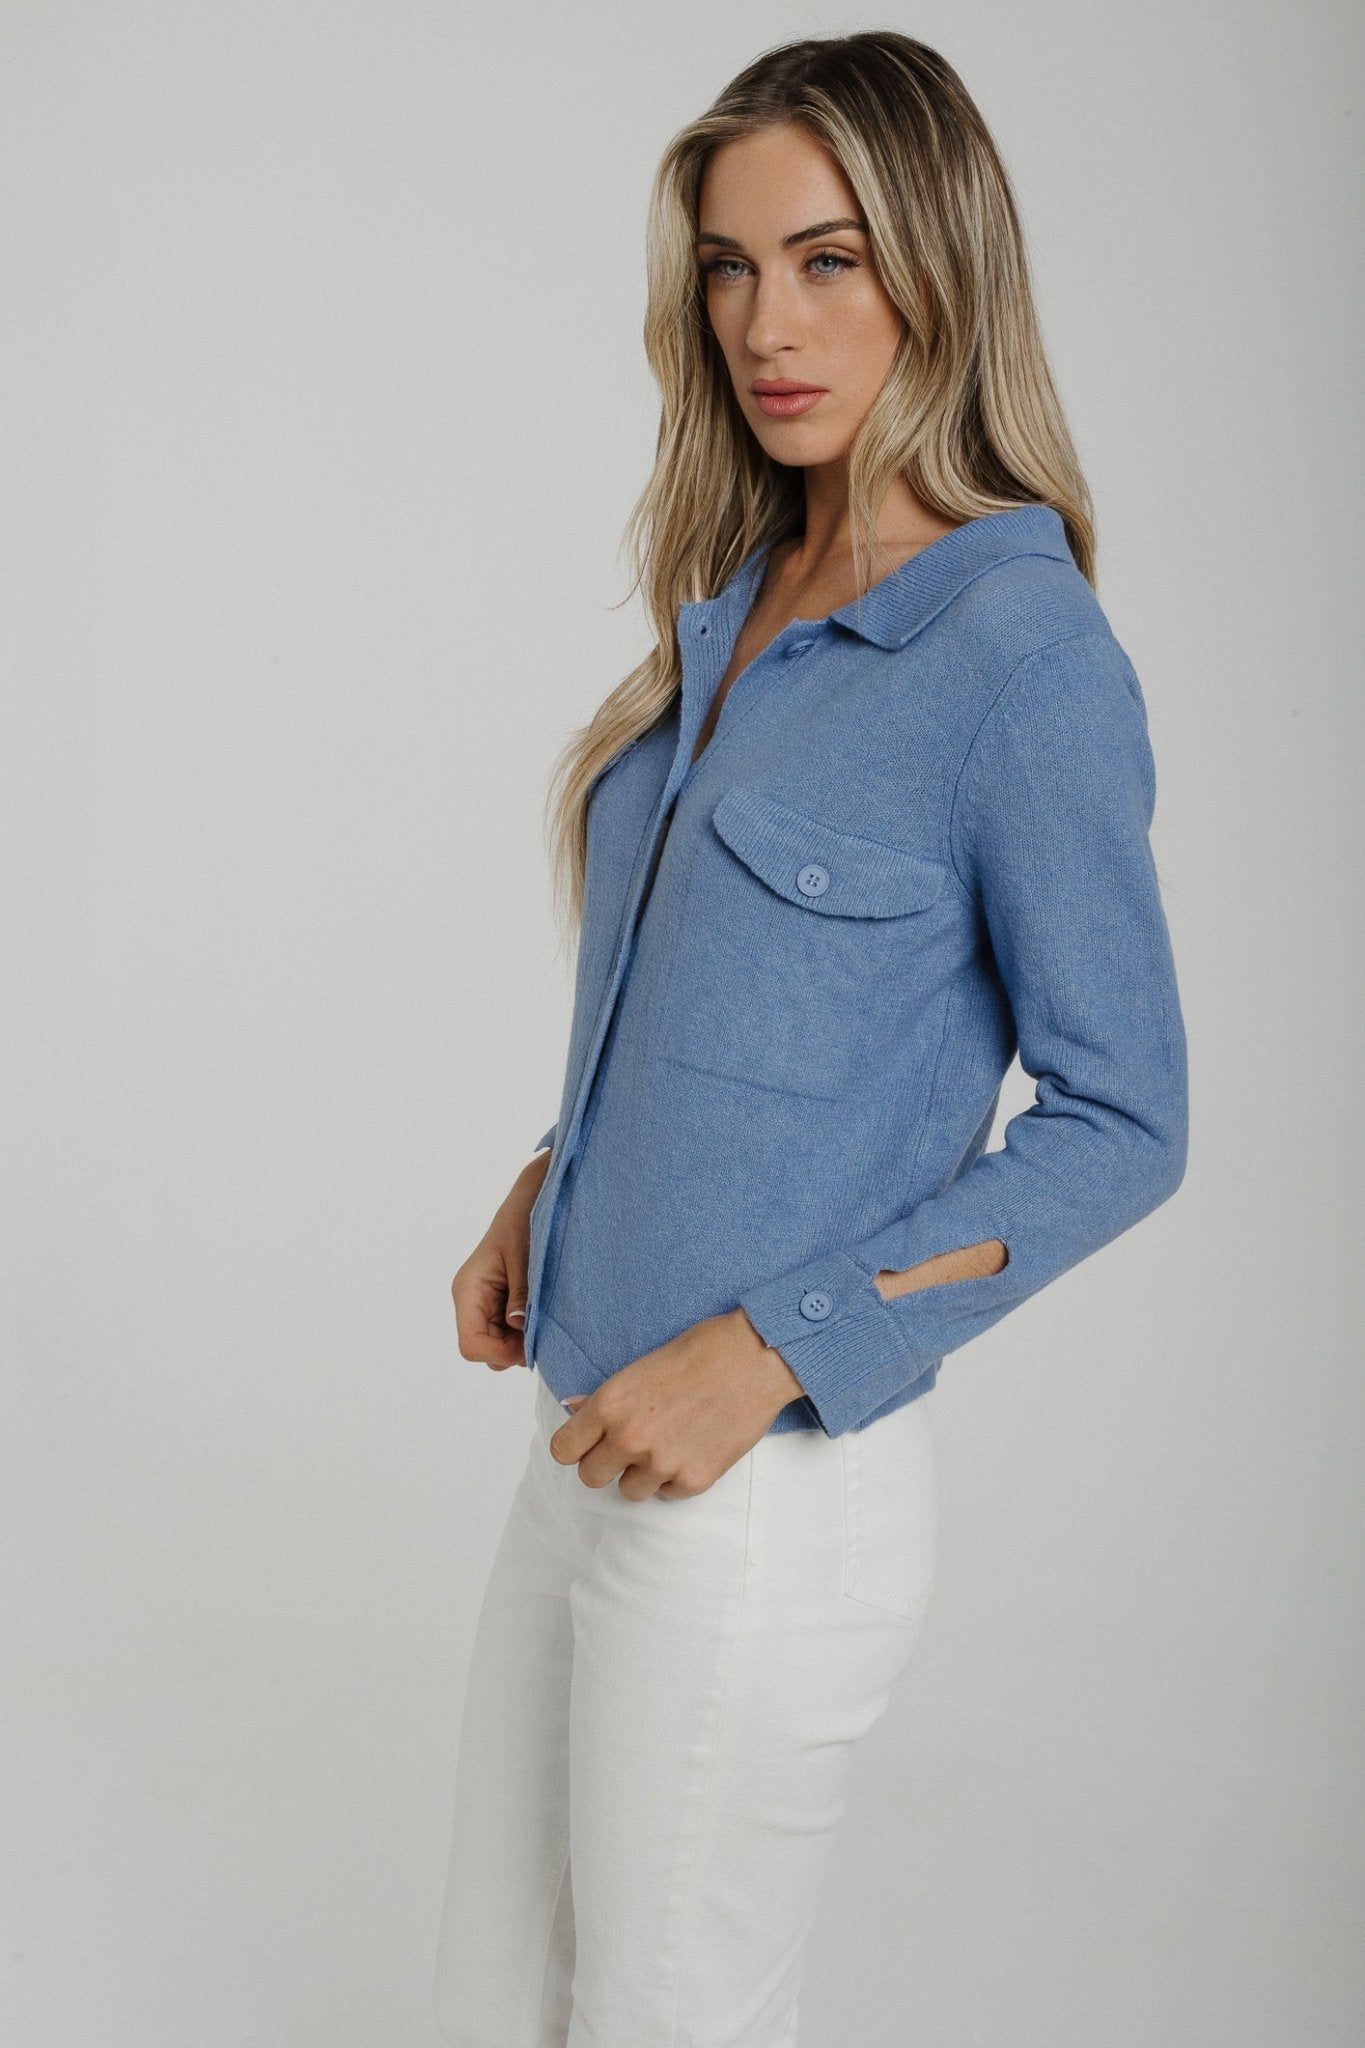 Sally Button Front Cardigan In Blue - The Walk in Wardrobe